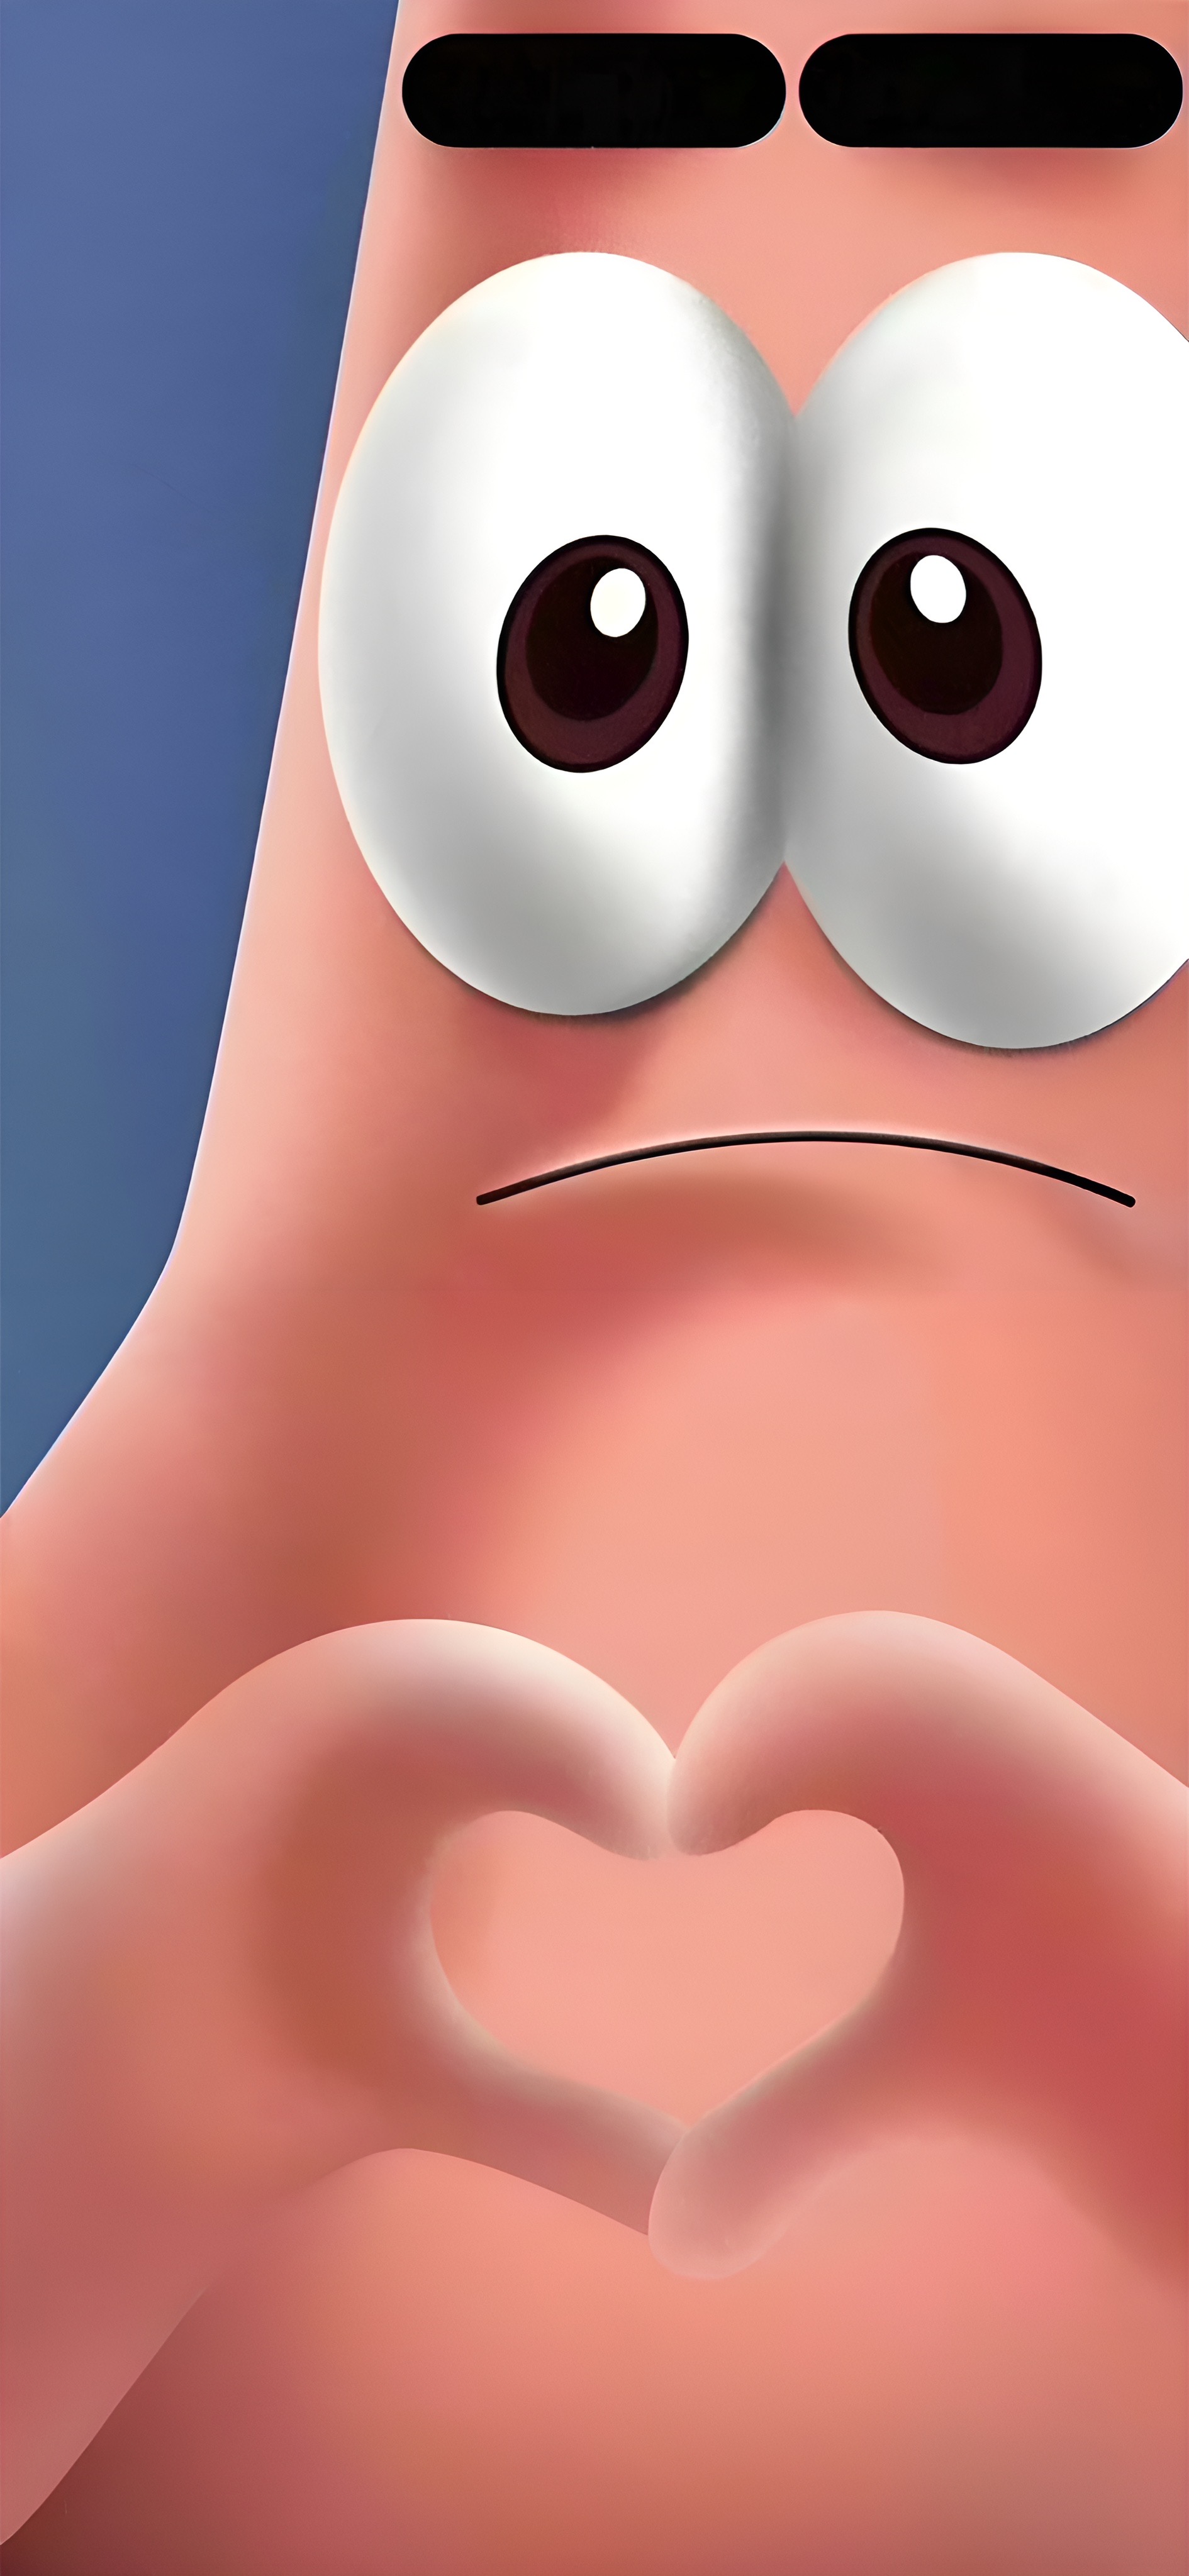 Kolpaper Wallpaper  Patrick Star Wallpapers Download  httpswwwkolpapercom82736patrickstarwallpapers Patrick Star  Wallpapers for mobile phone tablet desktop computer and other devices HD  and 4K wallpapers Discover more Patrick Patrick 